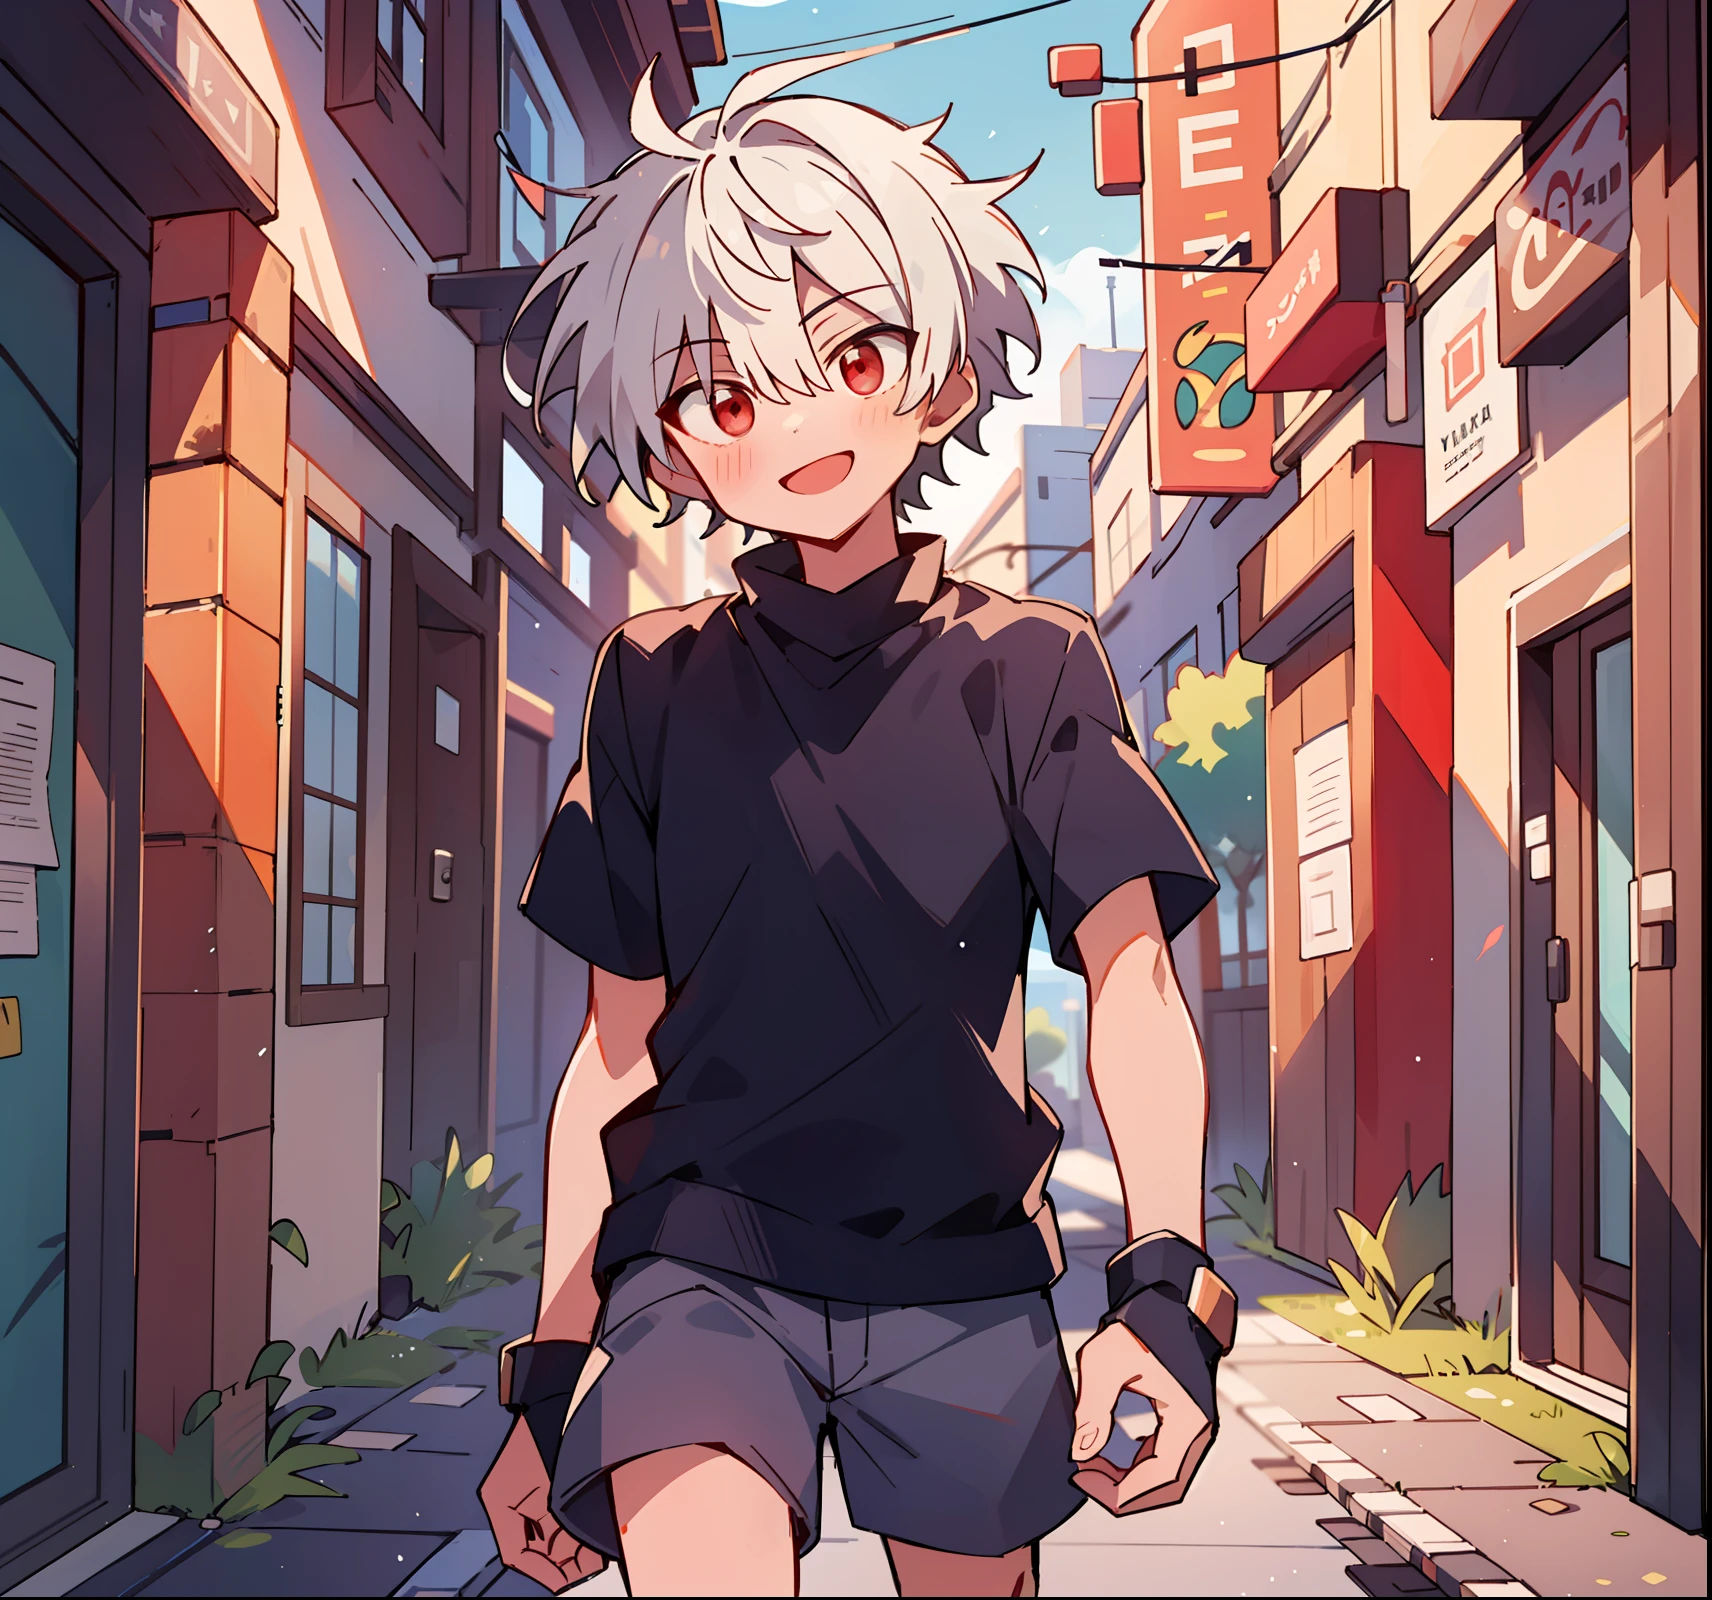 (high high quality, Breathtaking),(Expressive eyes, Perfect face), 1boys, Solo, short, Young boy, Short white hair, Red eyes, Smiling, Black , wear short shorts, urban surroundings, cyber outfit, Short shorts, Virtual world